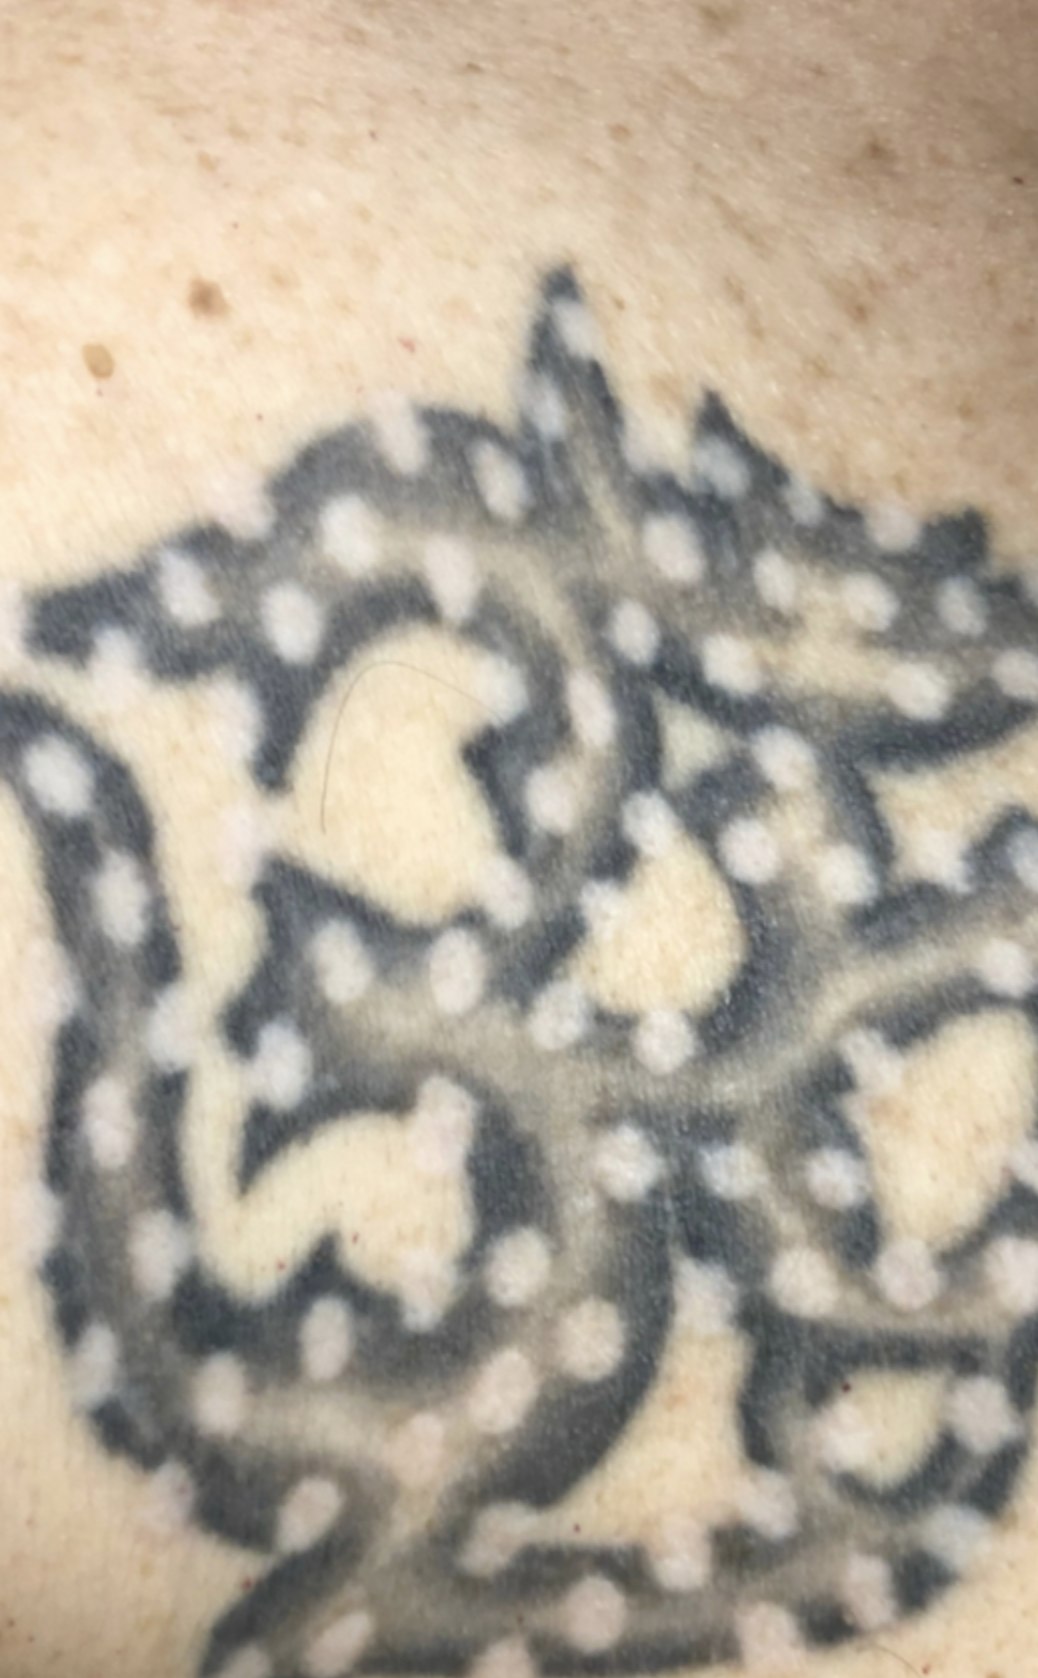 removal of chest tattoo